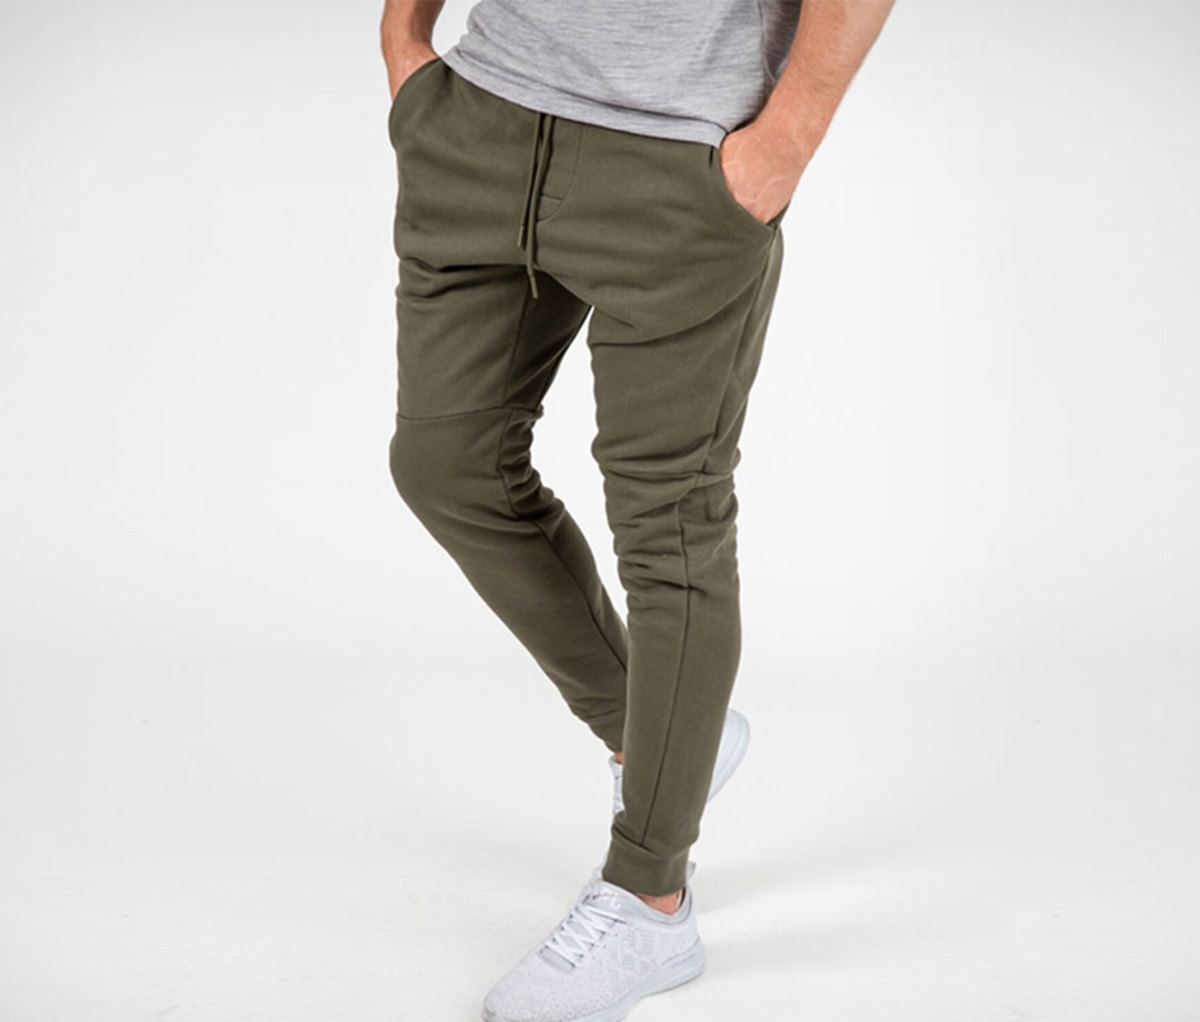 The Most Stylish Pairs of Sweatpants a Man Can Own